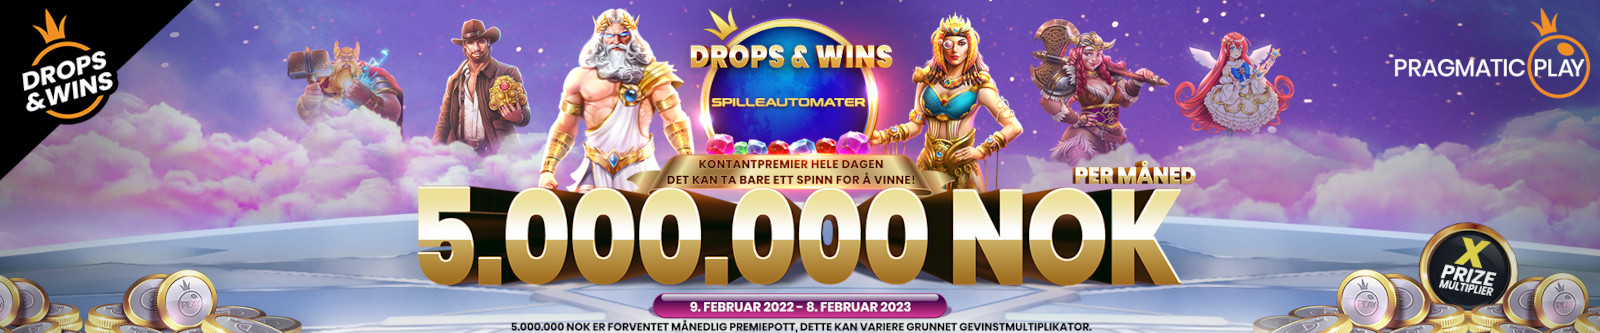 Drops & Wins Spilleautomater